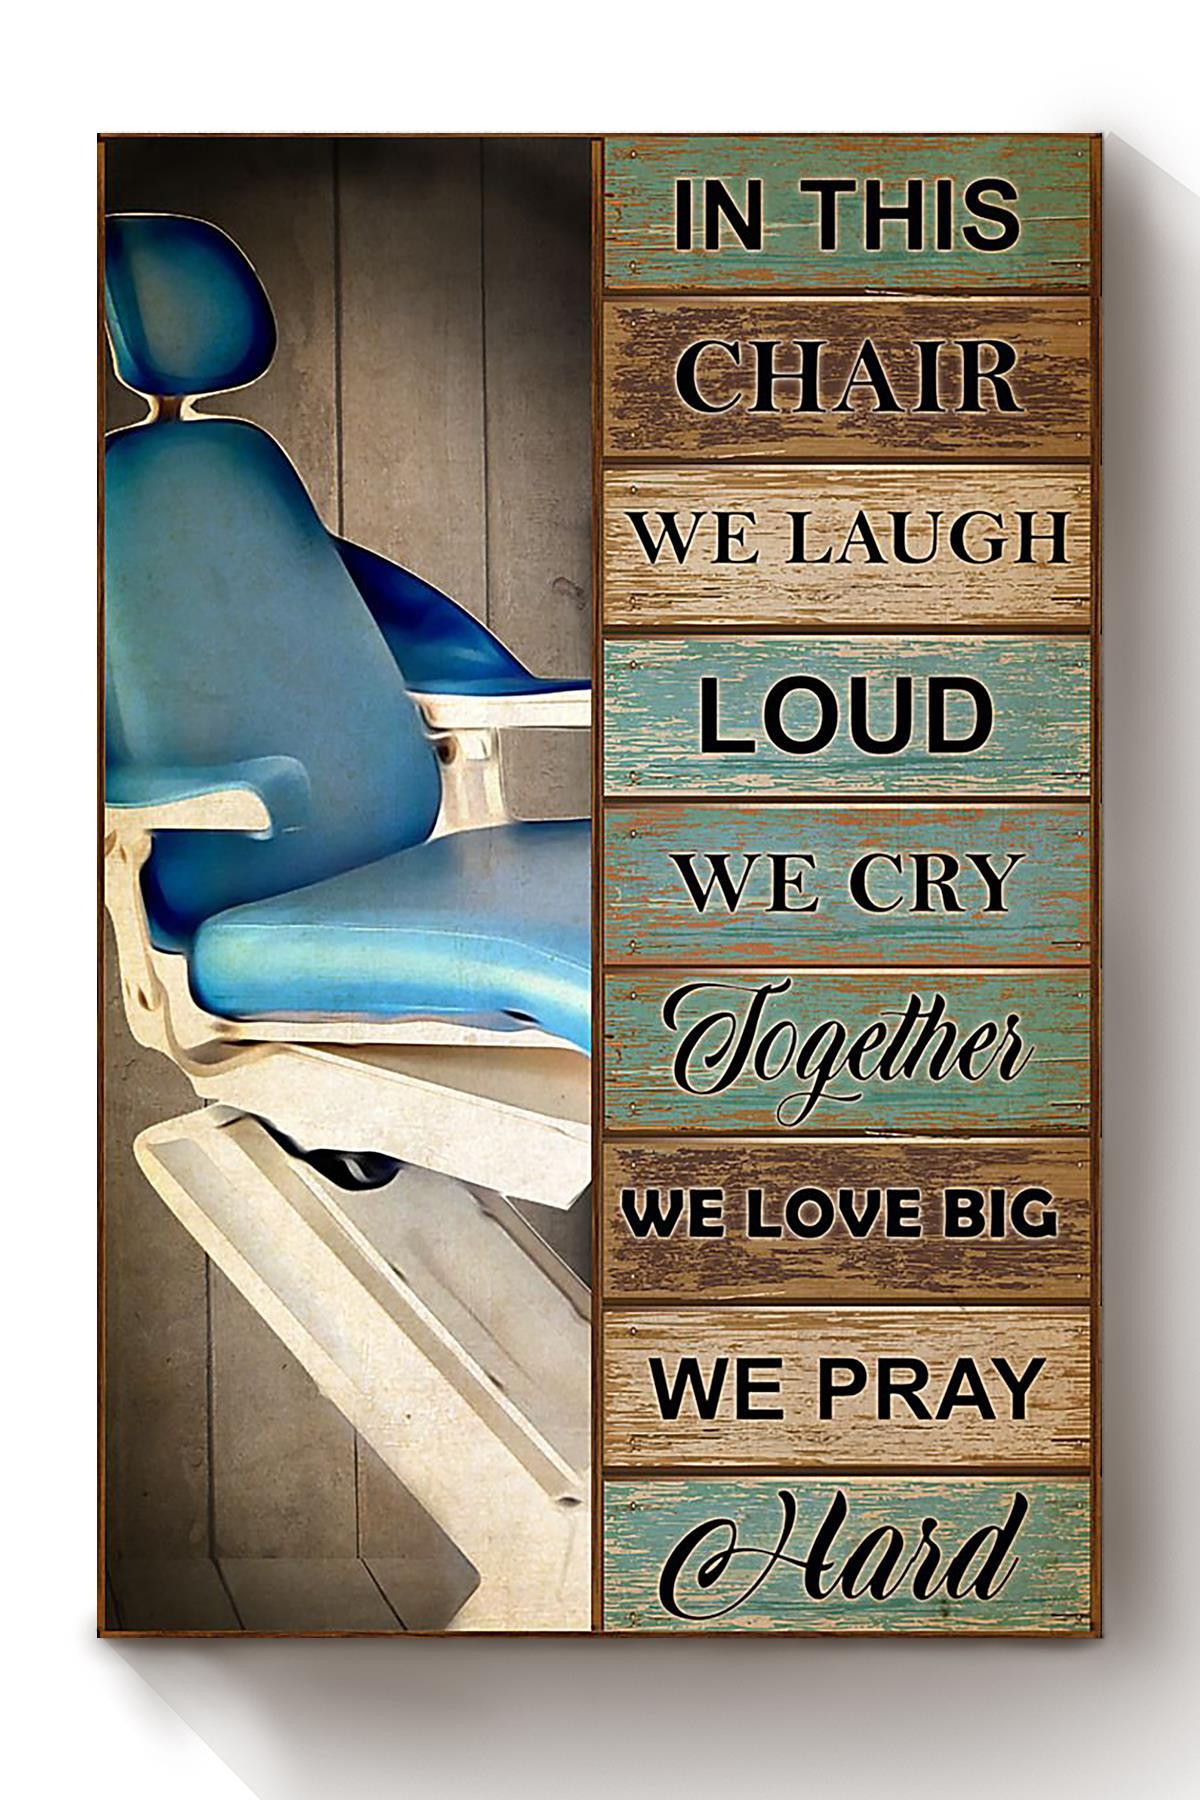 Dental Assistant In This Chair Canvas Art Dental Tooth Art For Dentist Day Canvas Wrapped Canvas 8x10